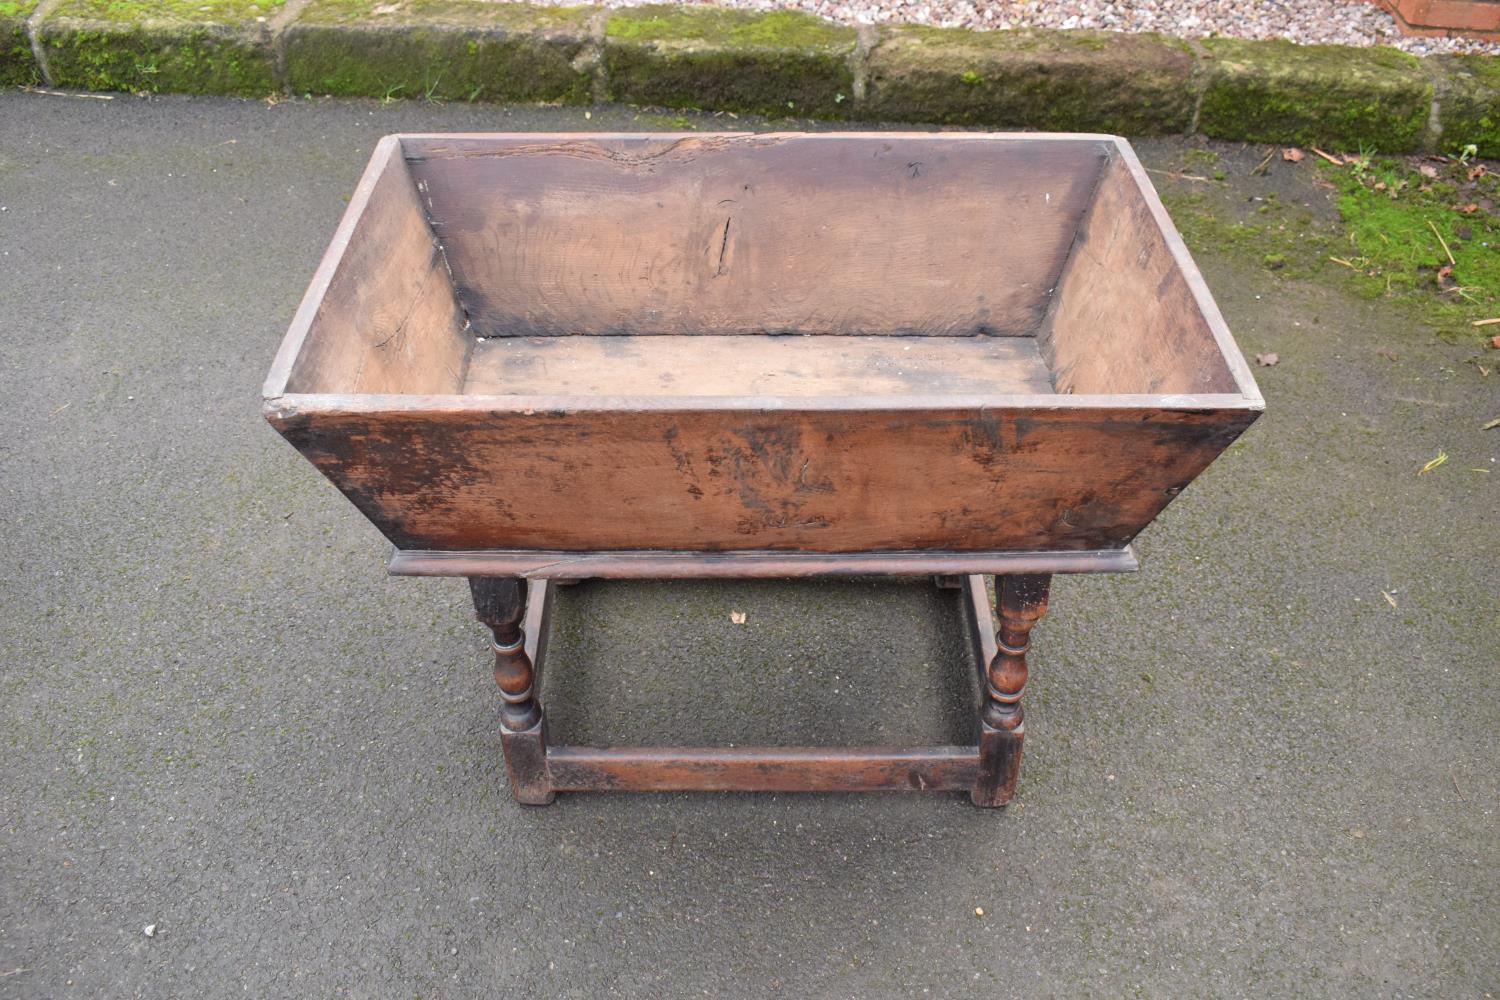 Victorian Oak dough bin with lift off lid. In good condition with age related wear as expected. - Image 2 of 6